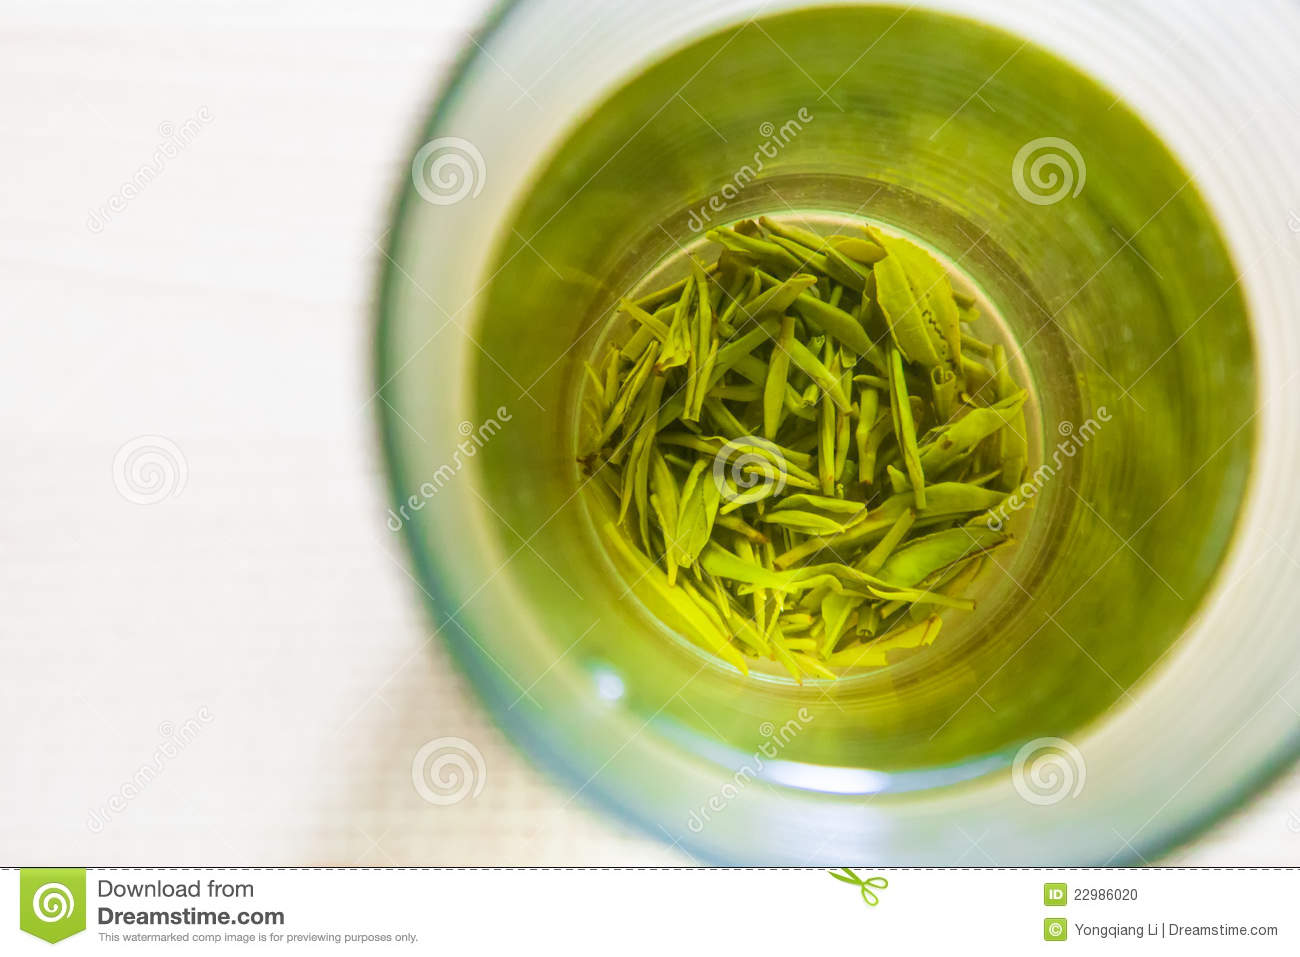 Chinese Like To Drink Green Tea Which Can Help Them To Relax And